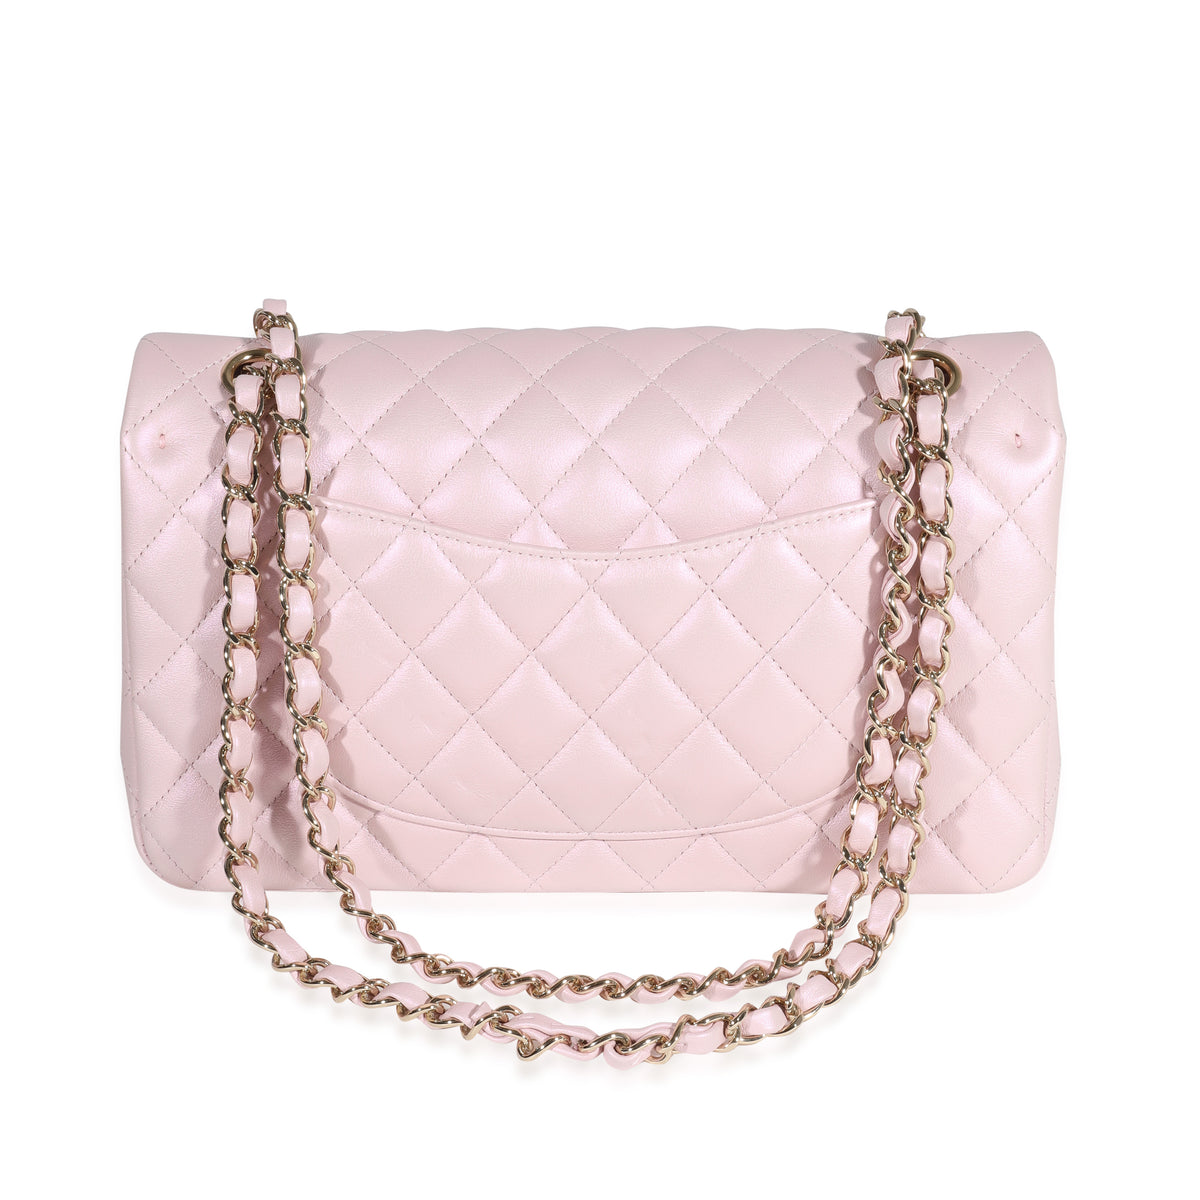 Chanel Iridescent Pink Quilted Lambskin Medium Classic Double Flap Bag